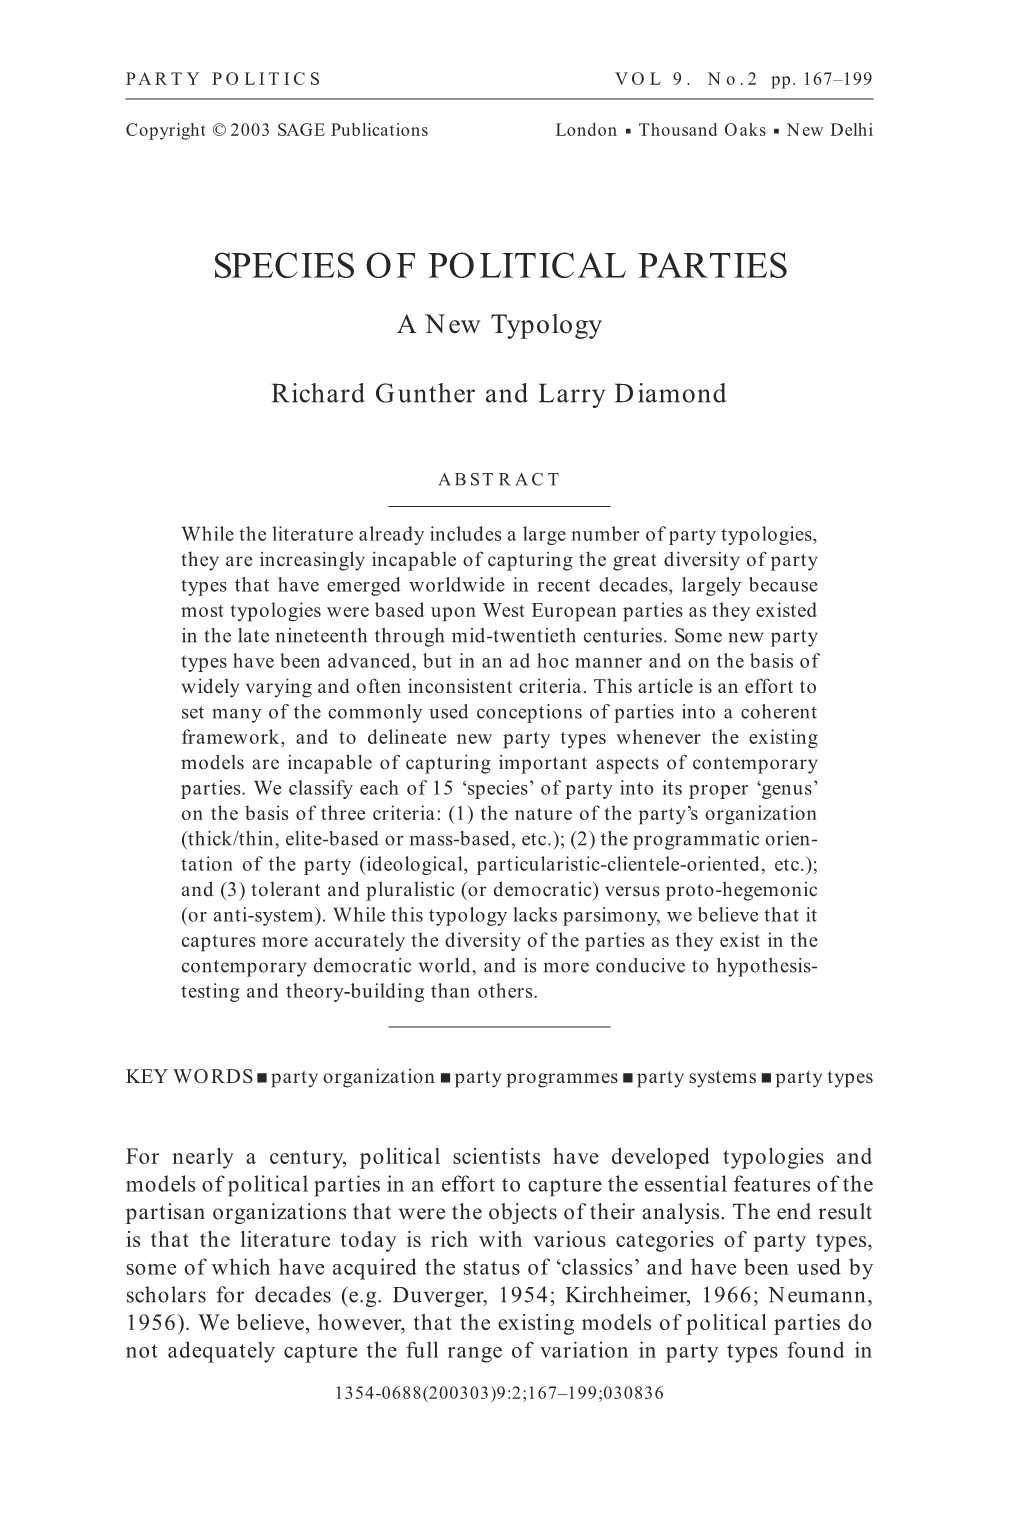 Species of Political Parties: a New Typology